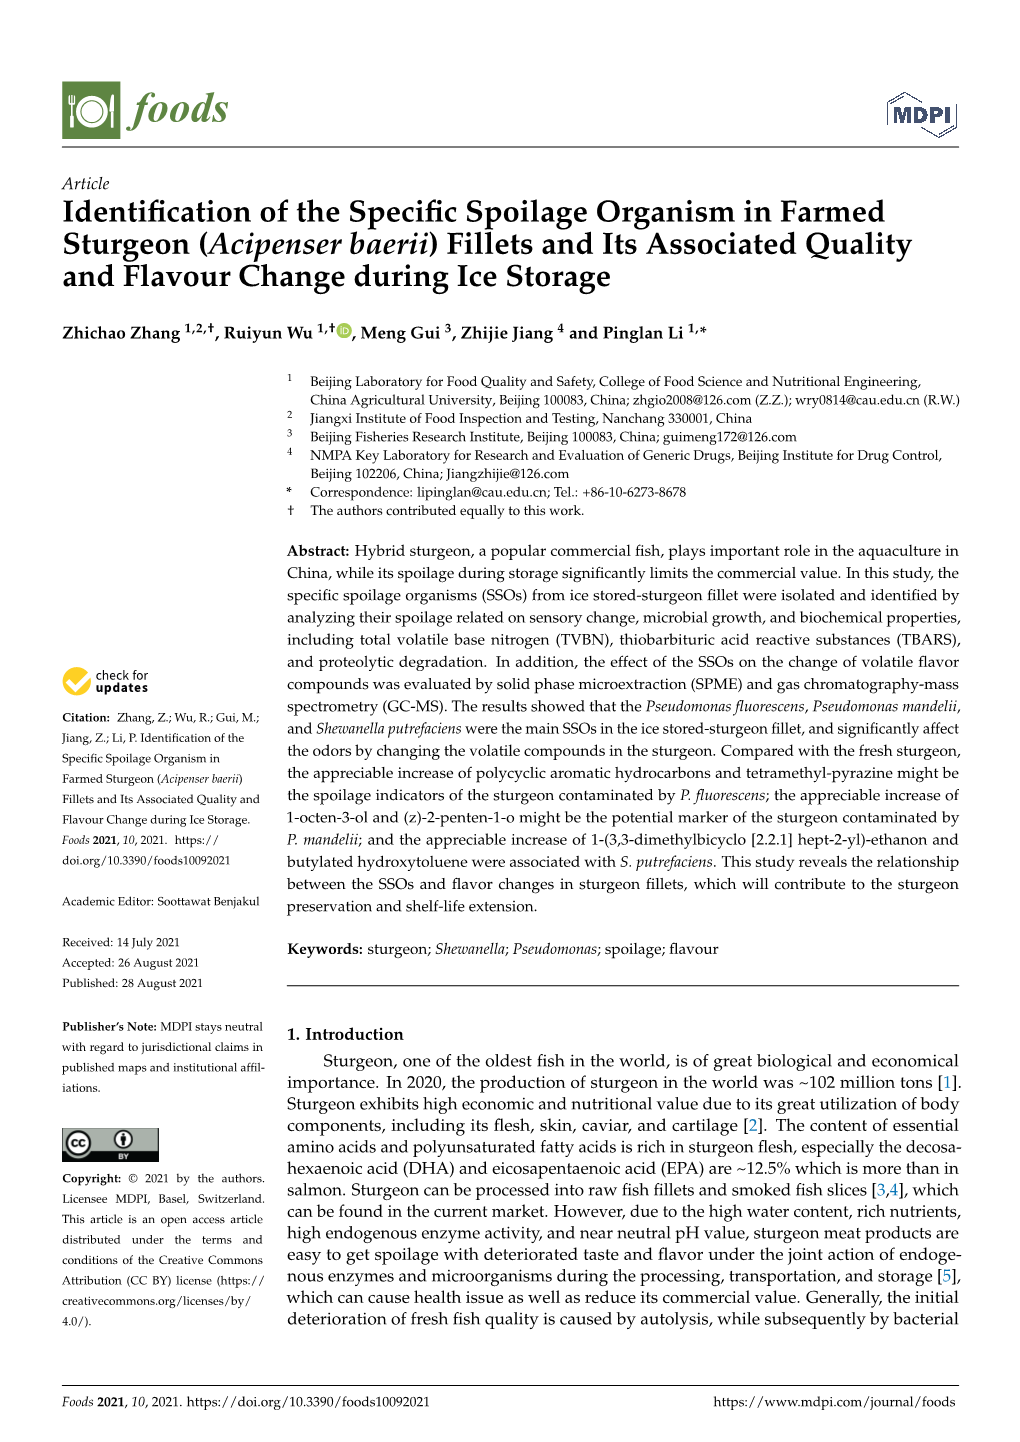 Identification of the Specific Spoilage Organism in Farmed Sturgeon